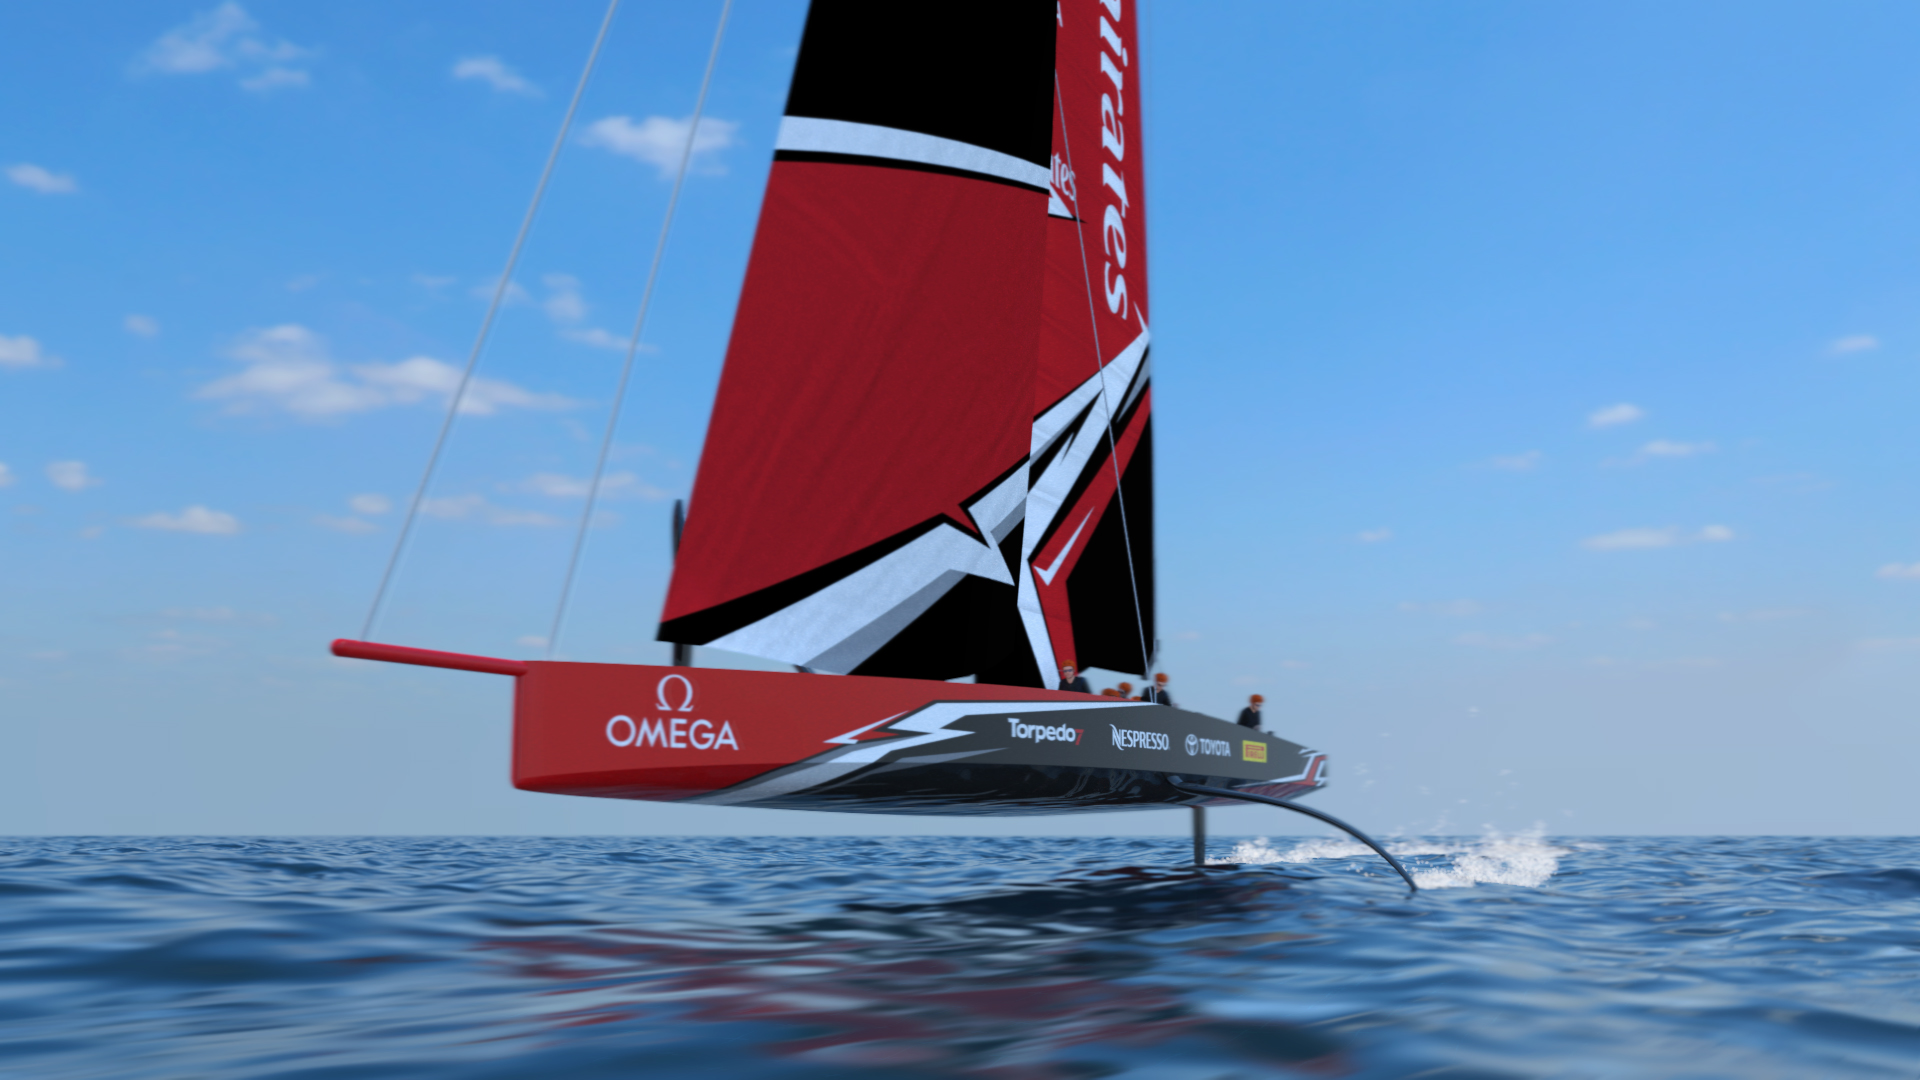 americas-cup-2021-quote-scommesse-online-betaland-luna-rossa-theclover